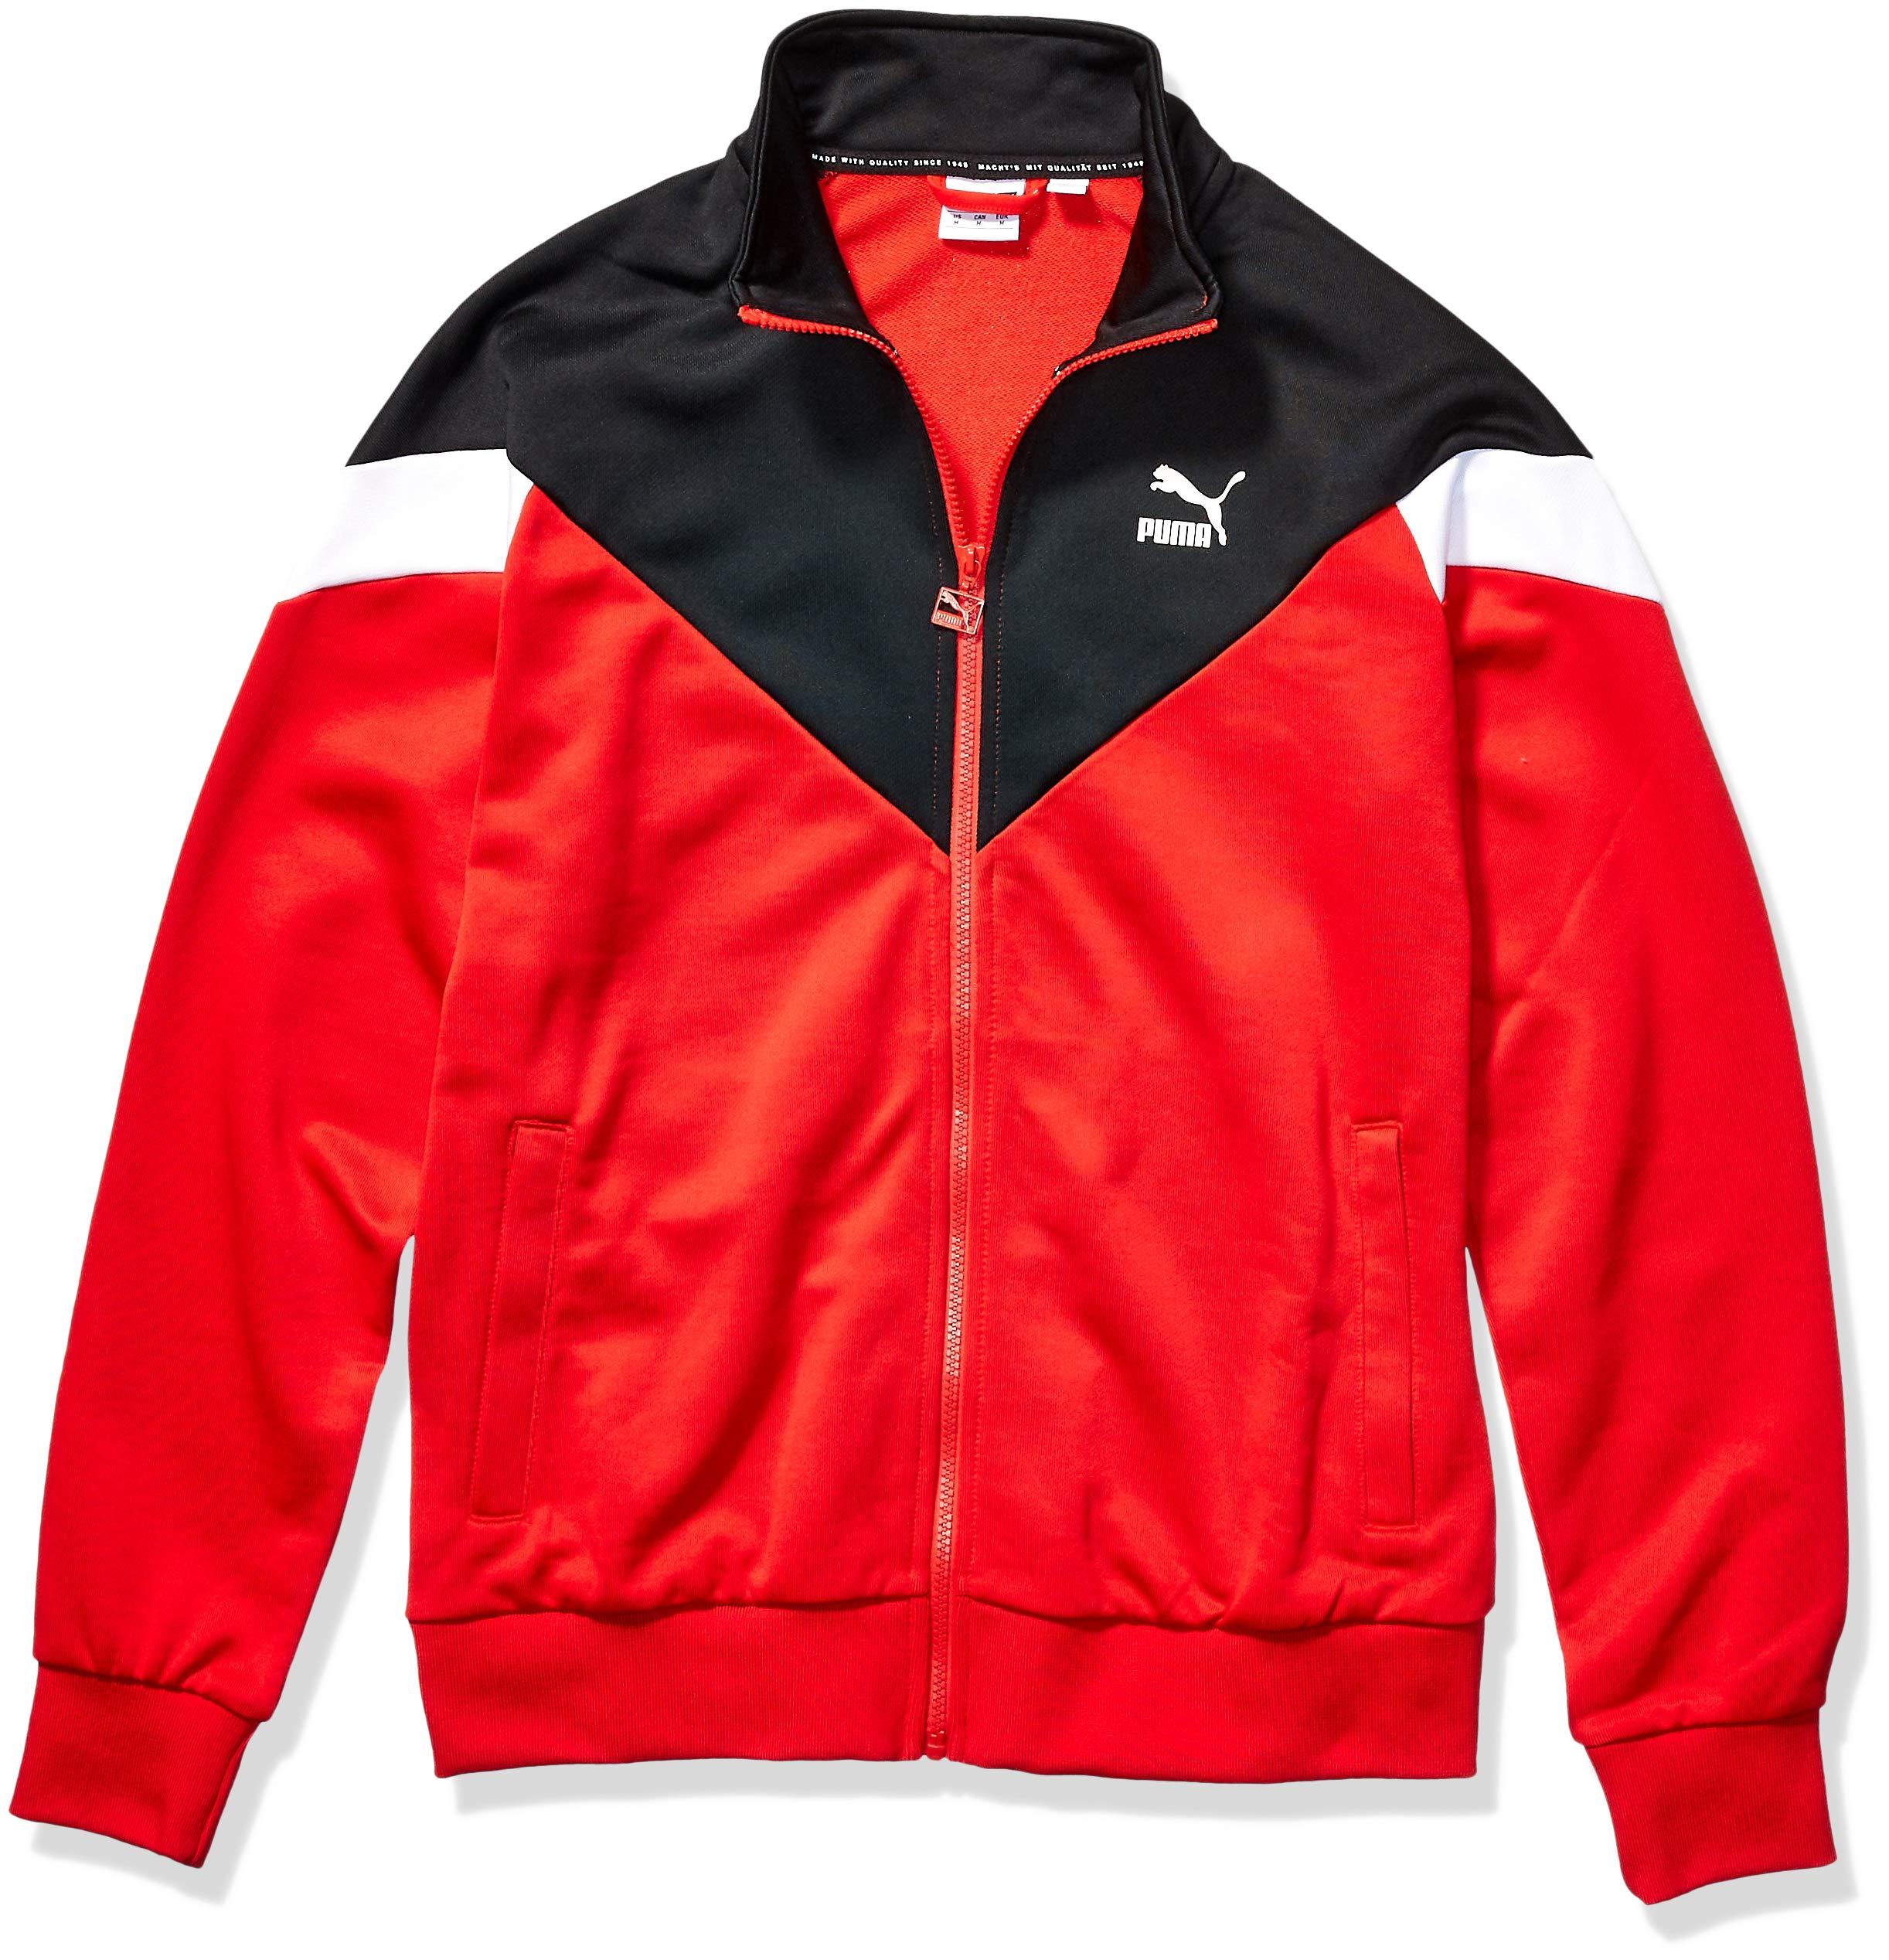 PUMA Iconic Mcs Track Jacket in Red for Men - Lyst